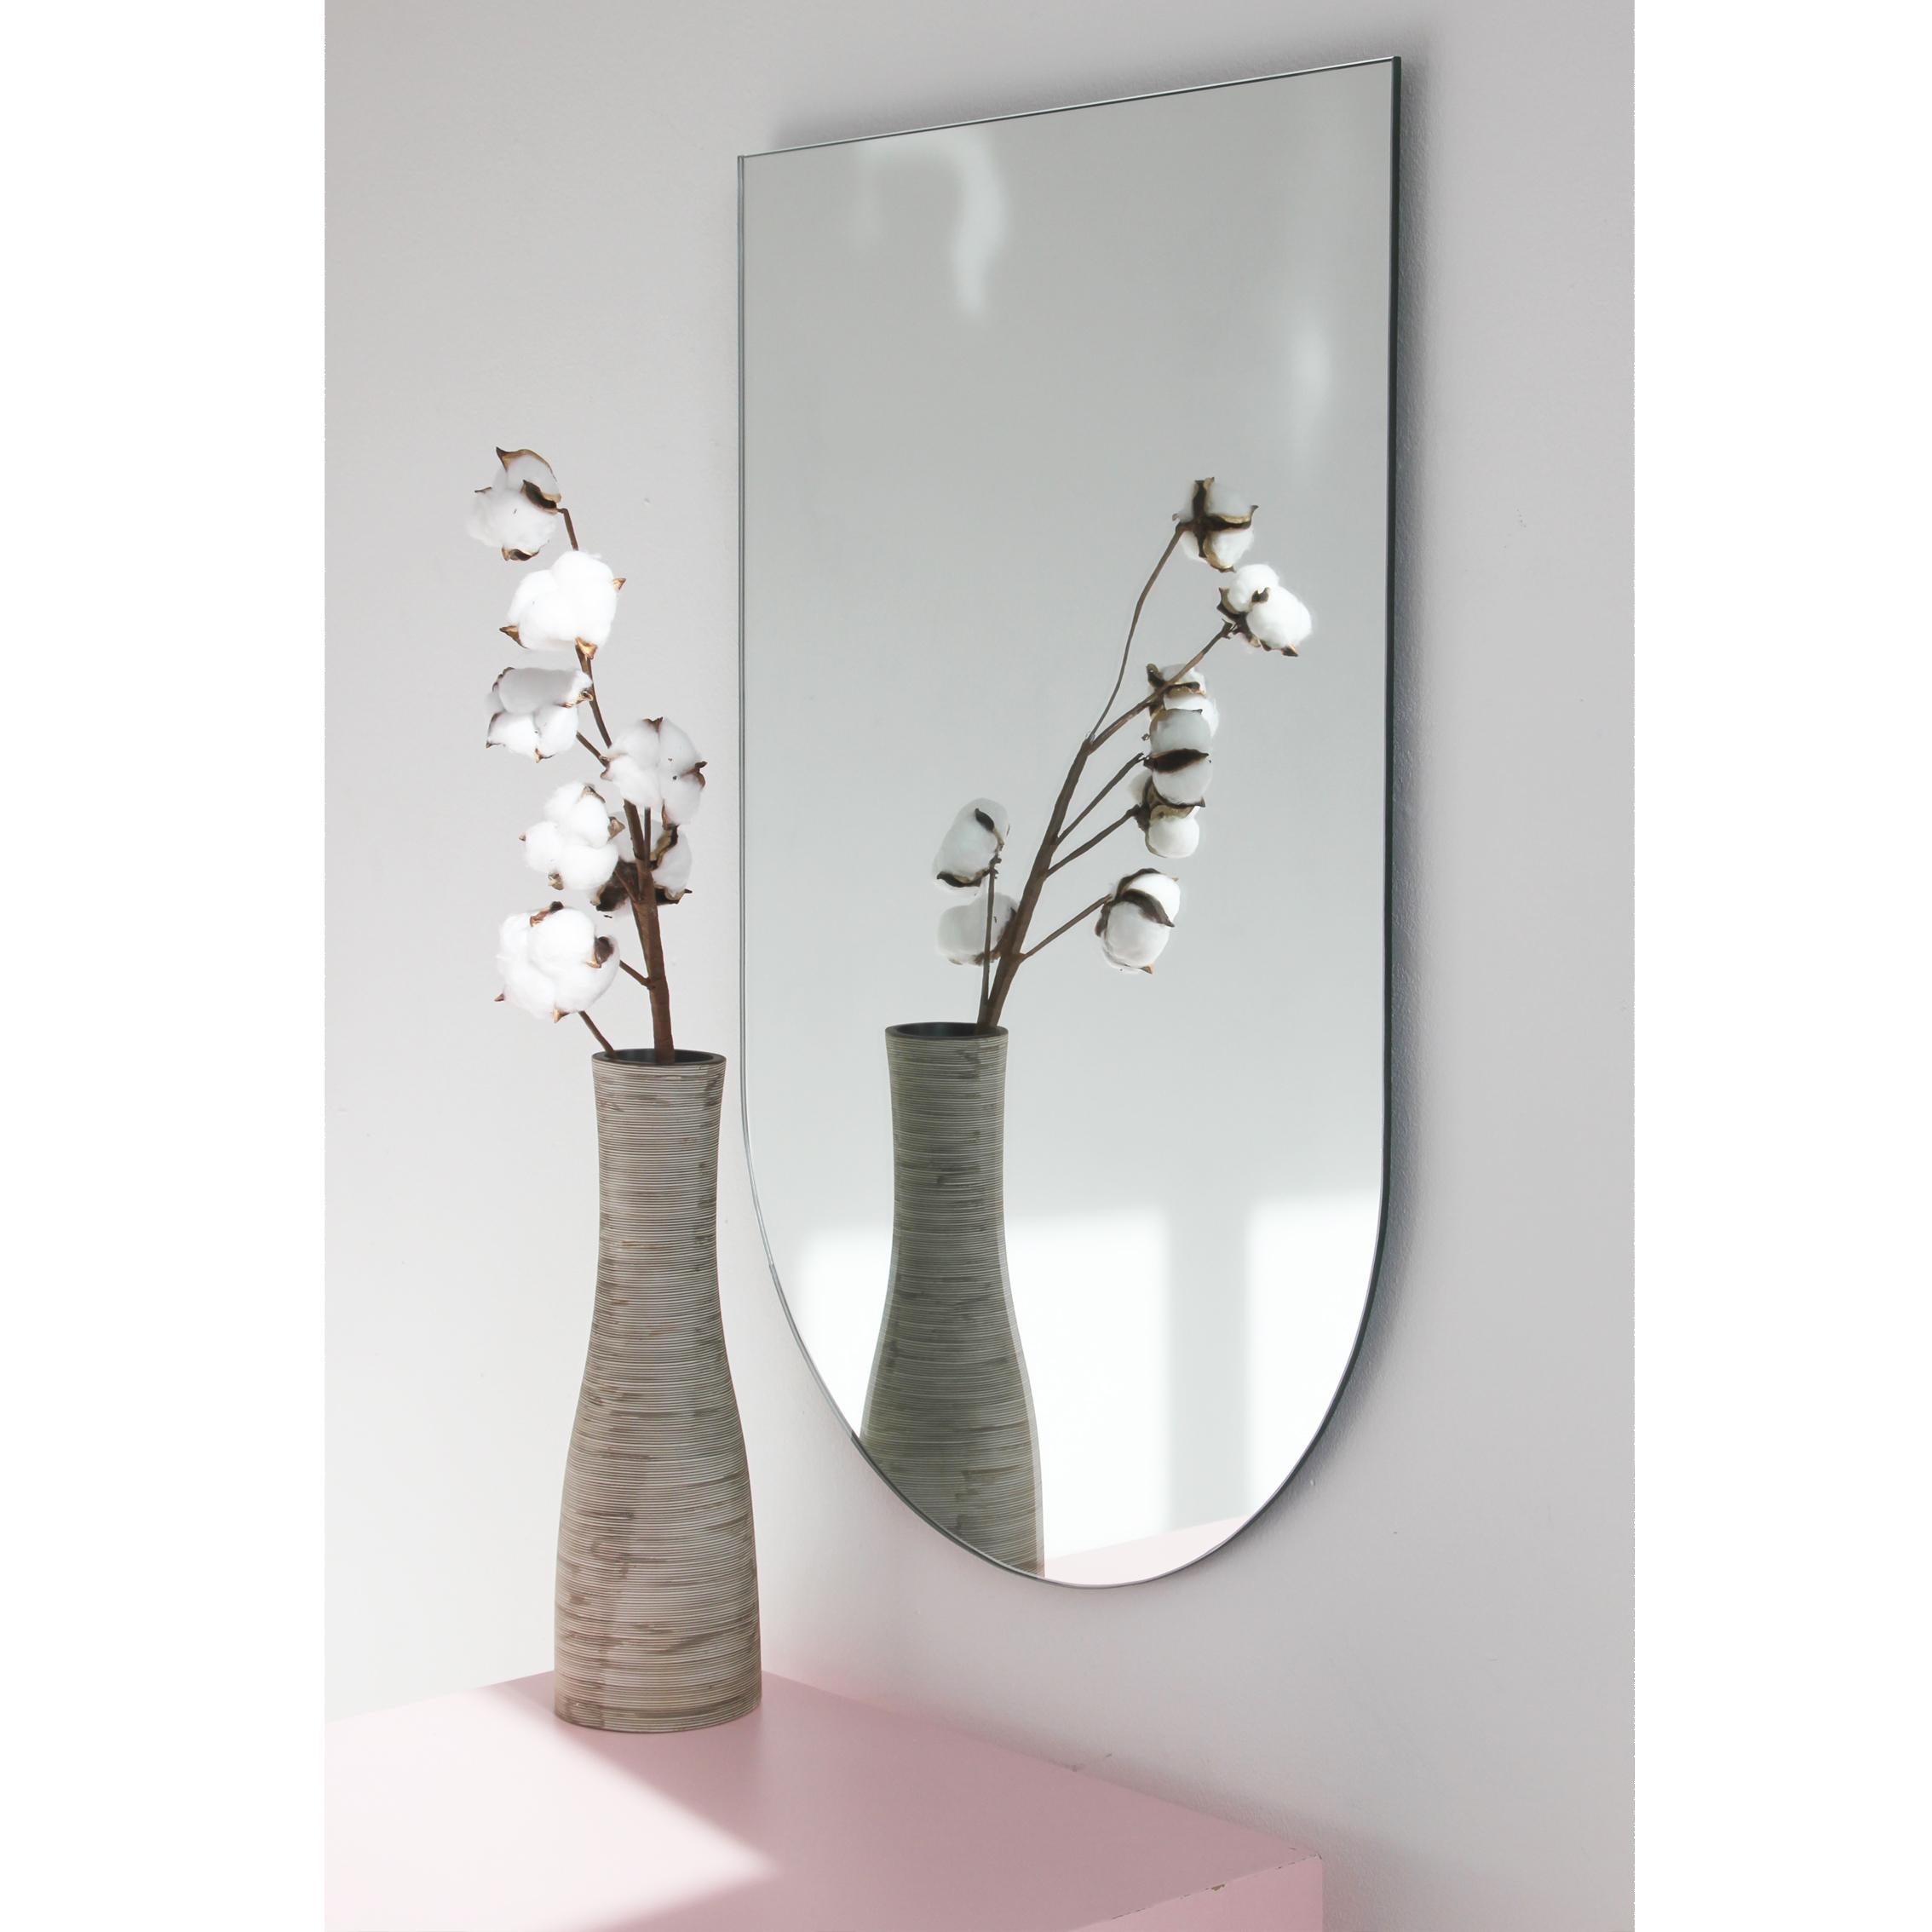 Minimalist arch shaped frameless mirror that can be hung in 4 different positions. Quality design that ensures the mirror sits perfectly parallel to the wall. Designed and made in London, UK.

Fitted with professional plates not visible once